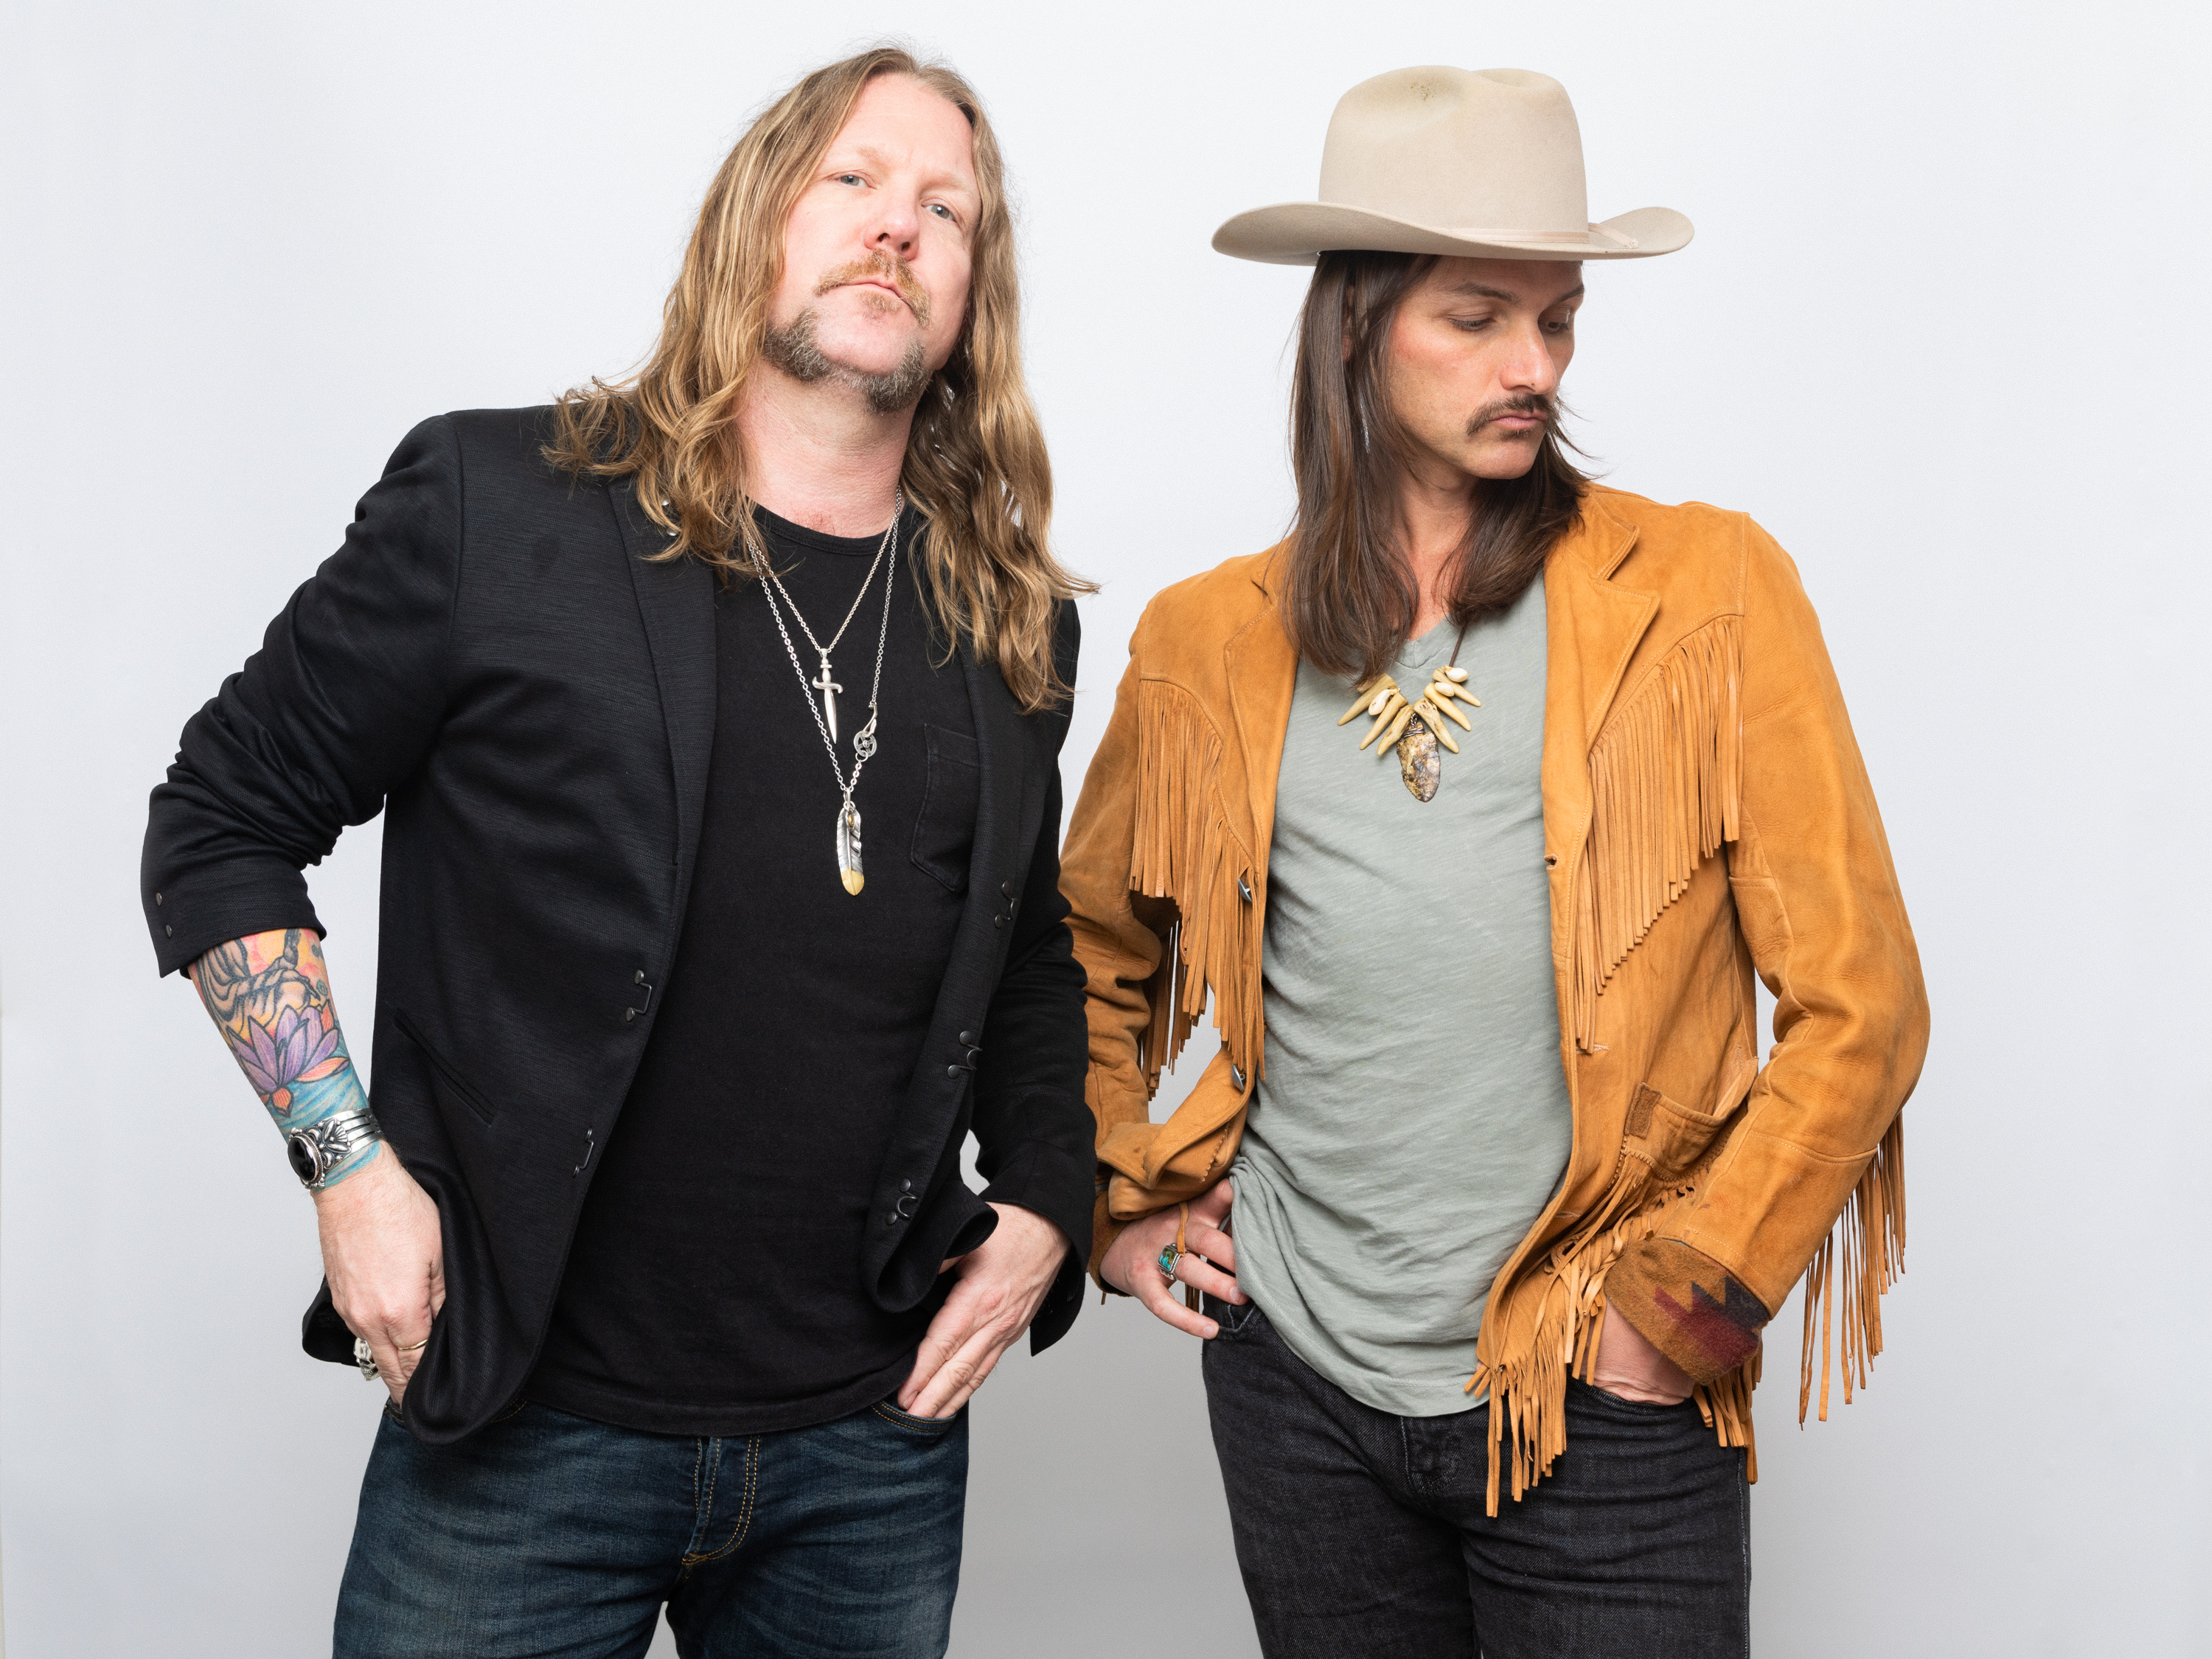 Duane Betts, Devon Allman Detail The Songwriting With ‘Bless Your Heart’ Track-By-Track